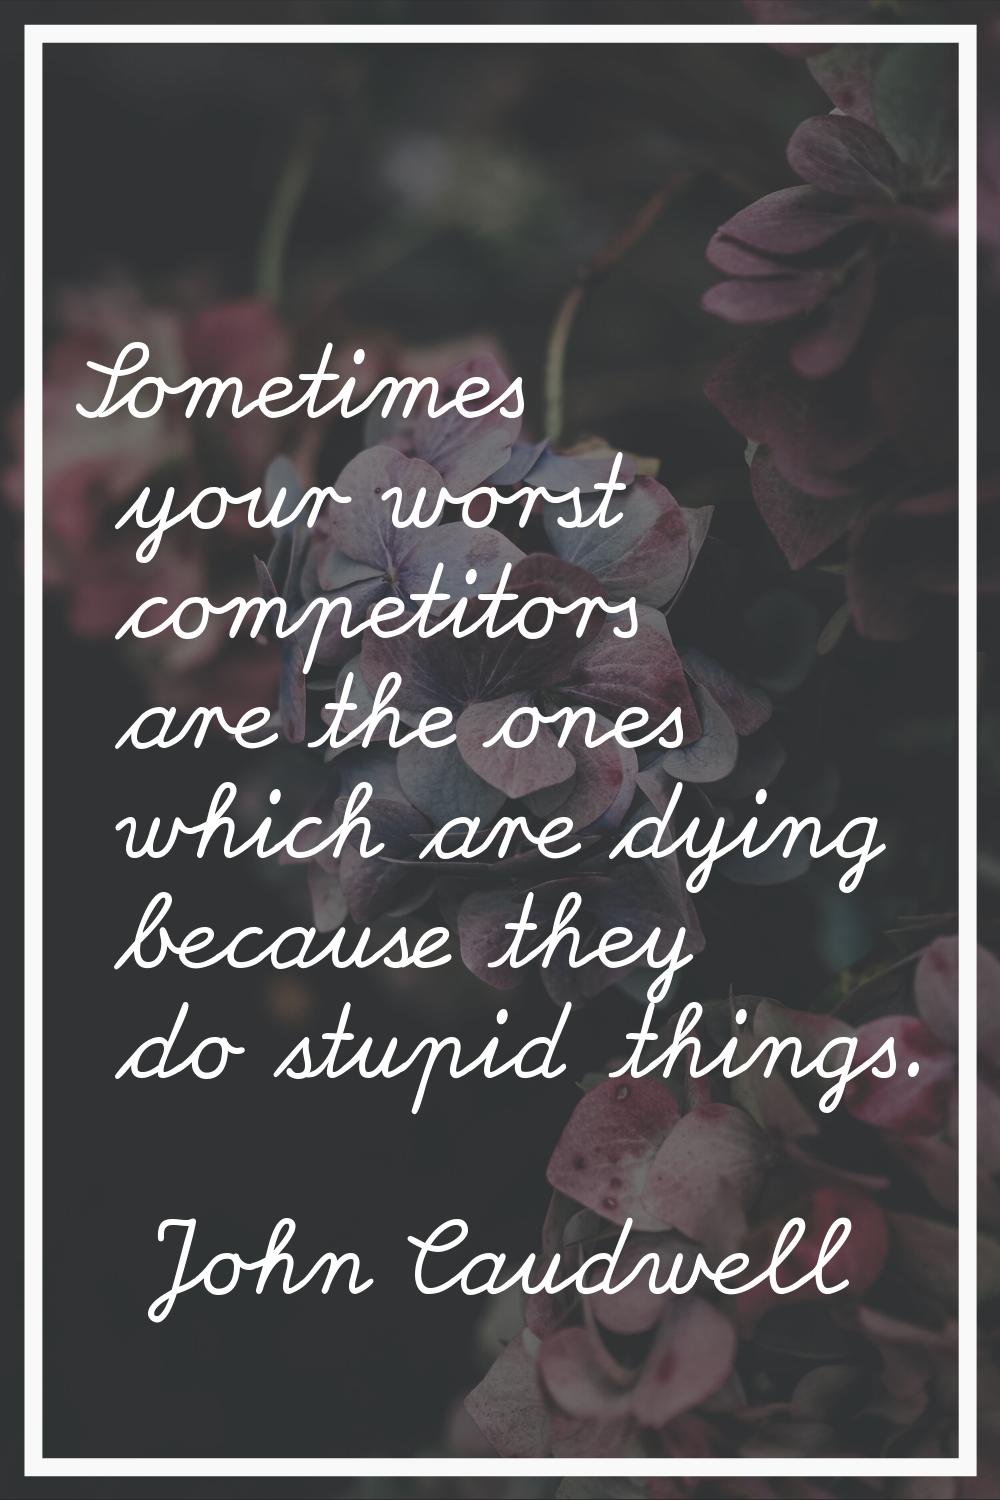 Sometimes your worst competitors are the ones which are dying because they do stupid things.